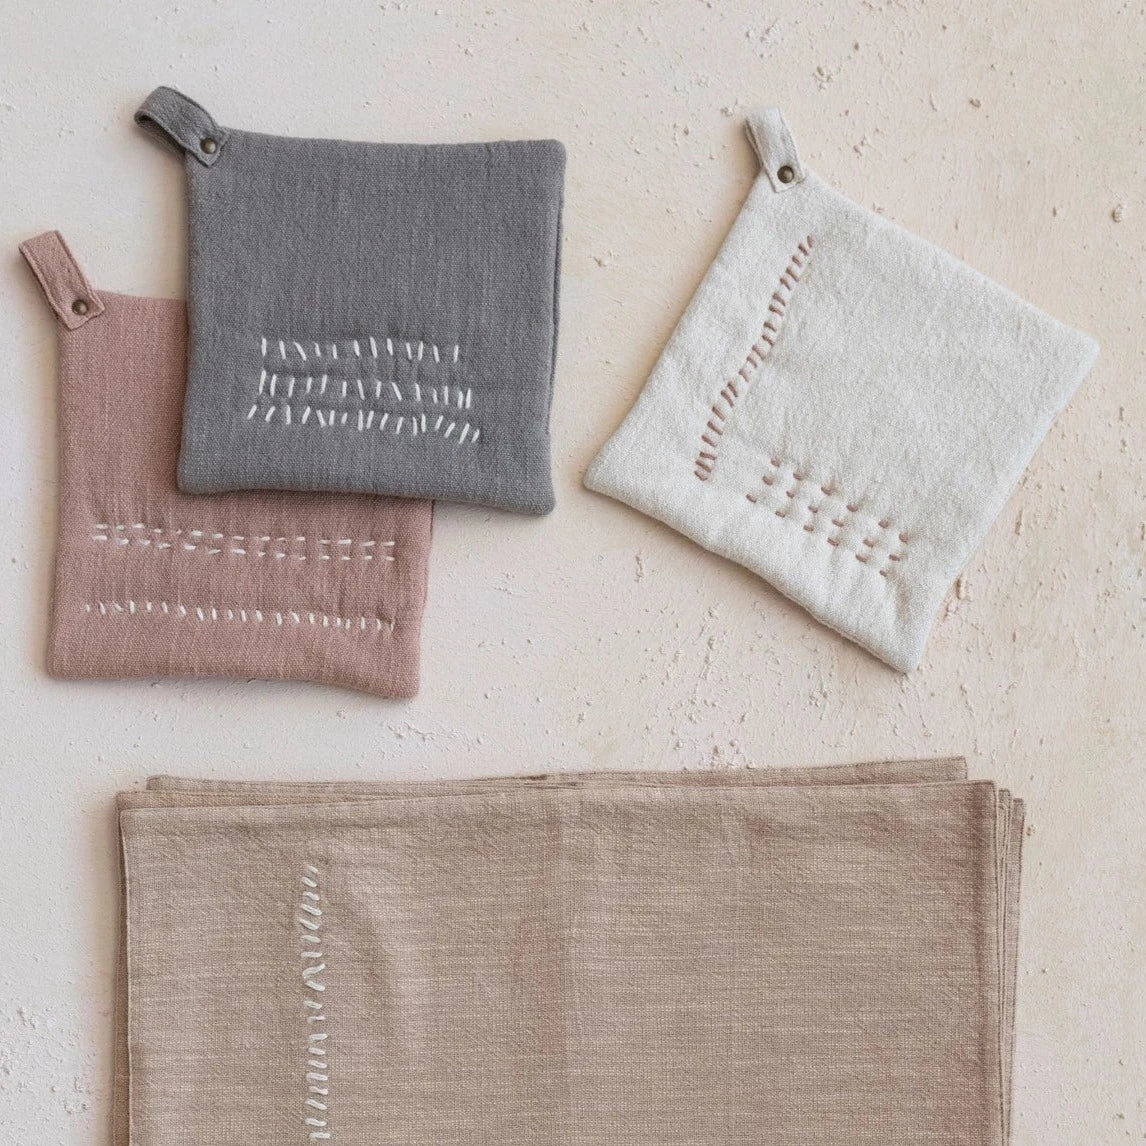 all three colors of hand embroidered cotton slub pot holders displayed next to hand towels on a light tan surface